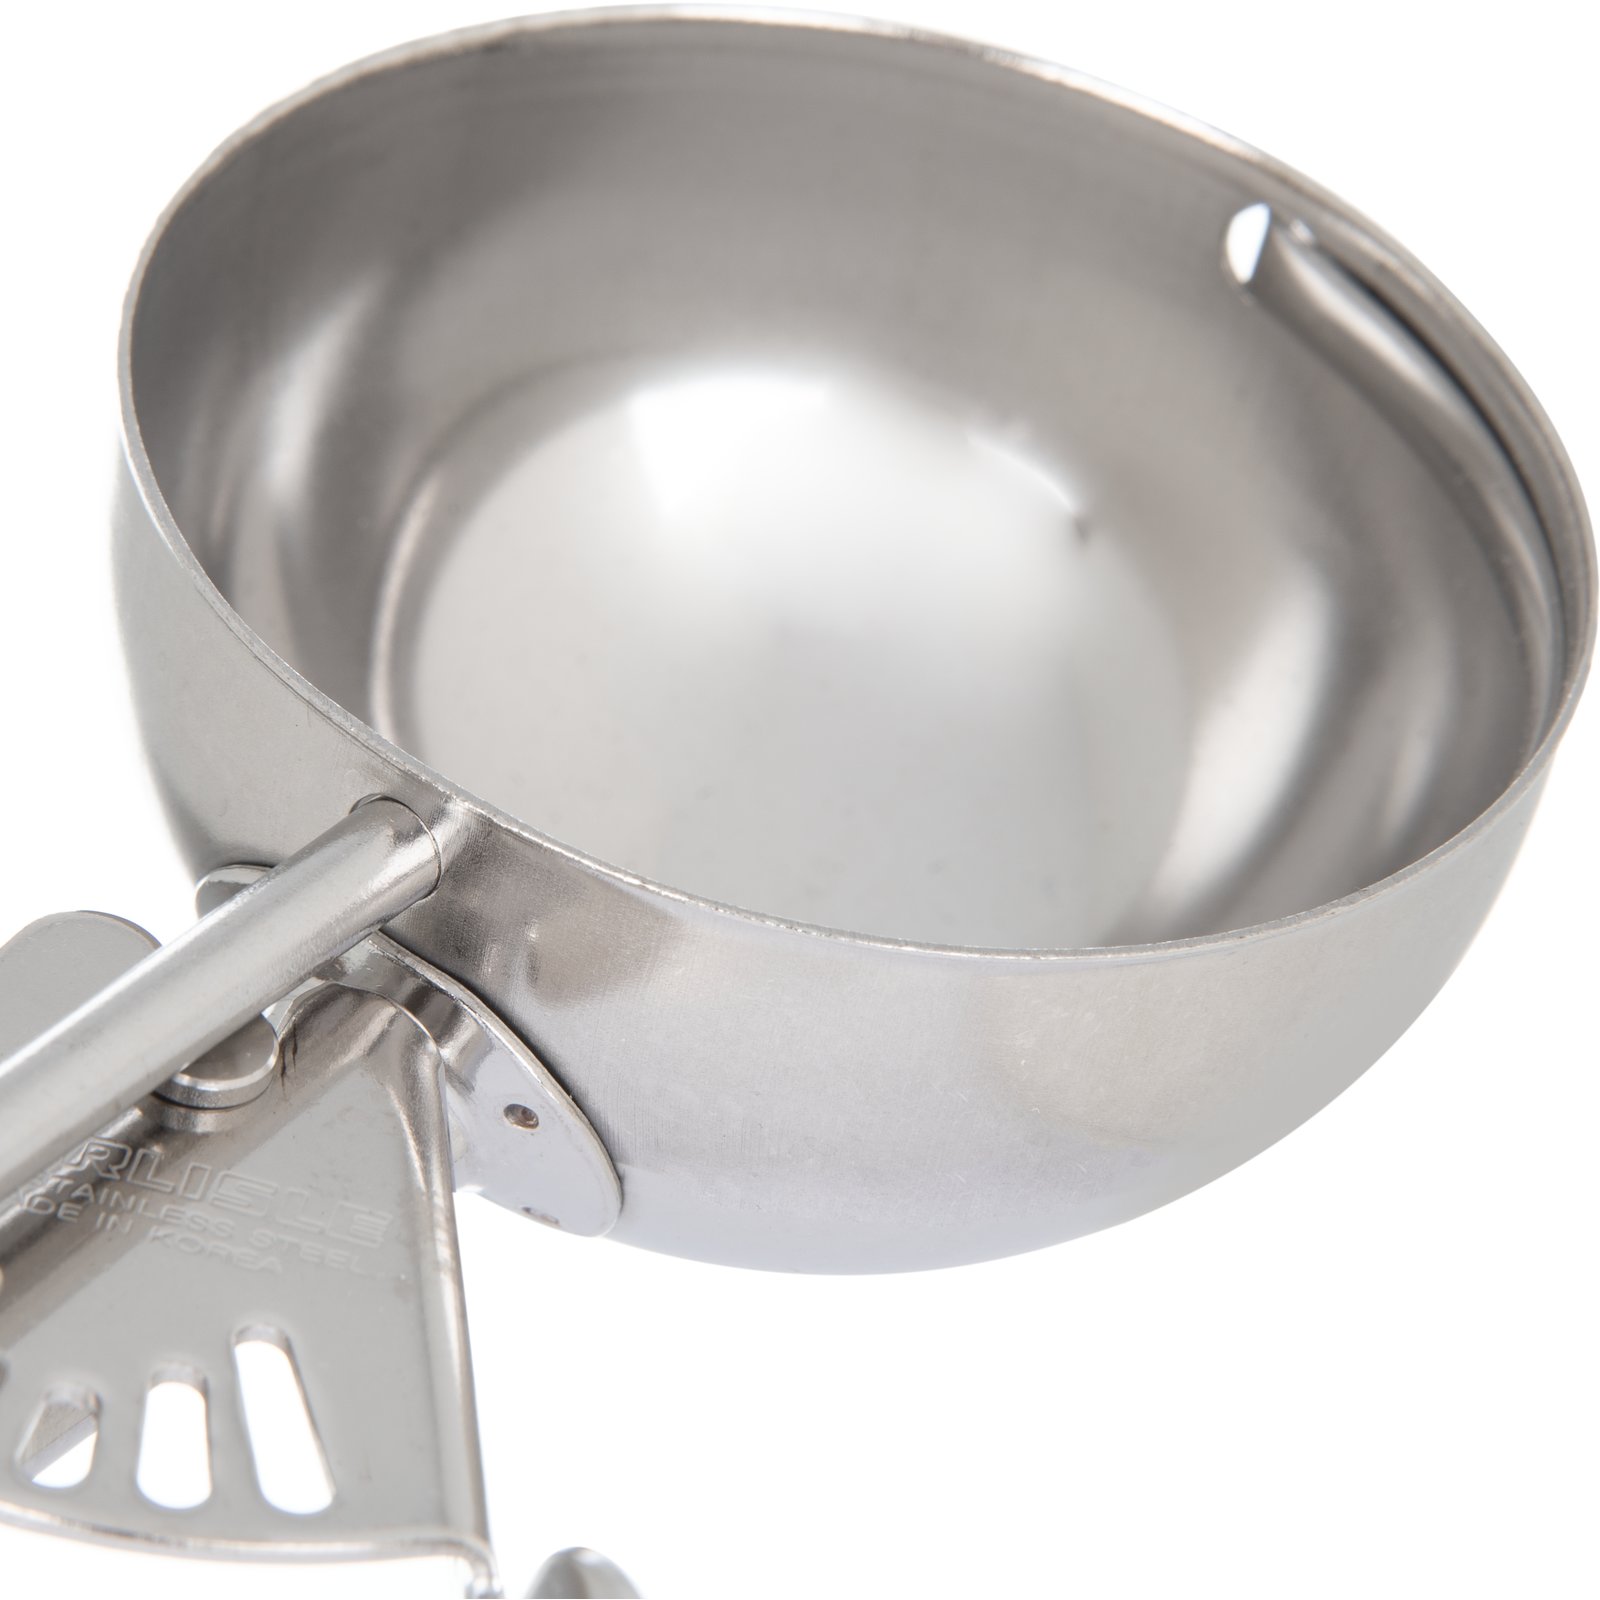 Disher, standard length, 8oz., size 4, 3-5/8 dia. stainless steel